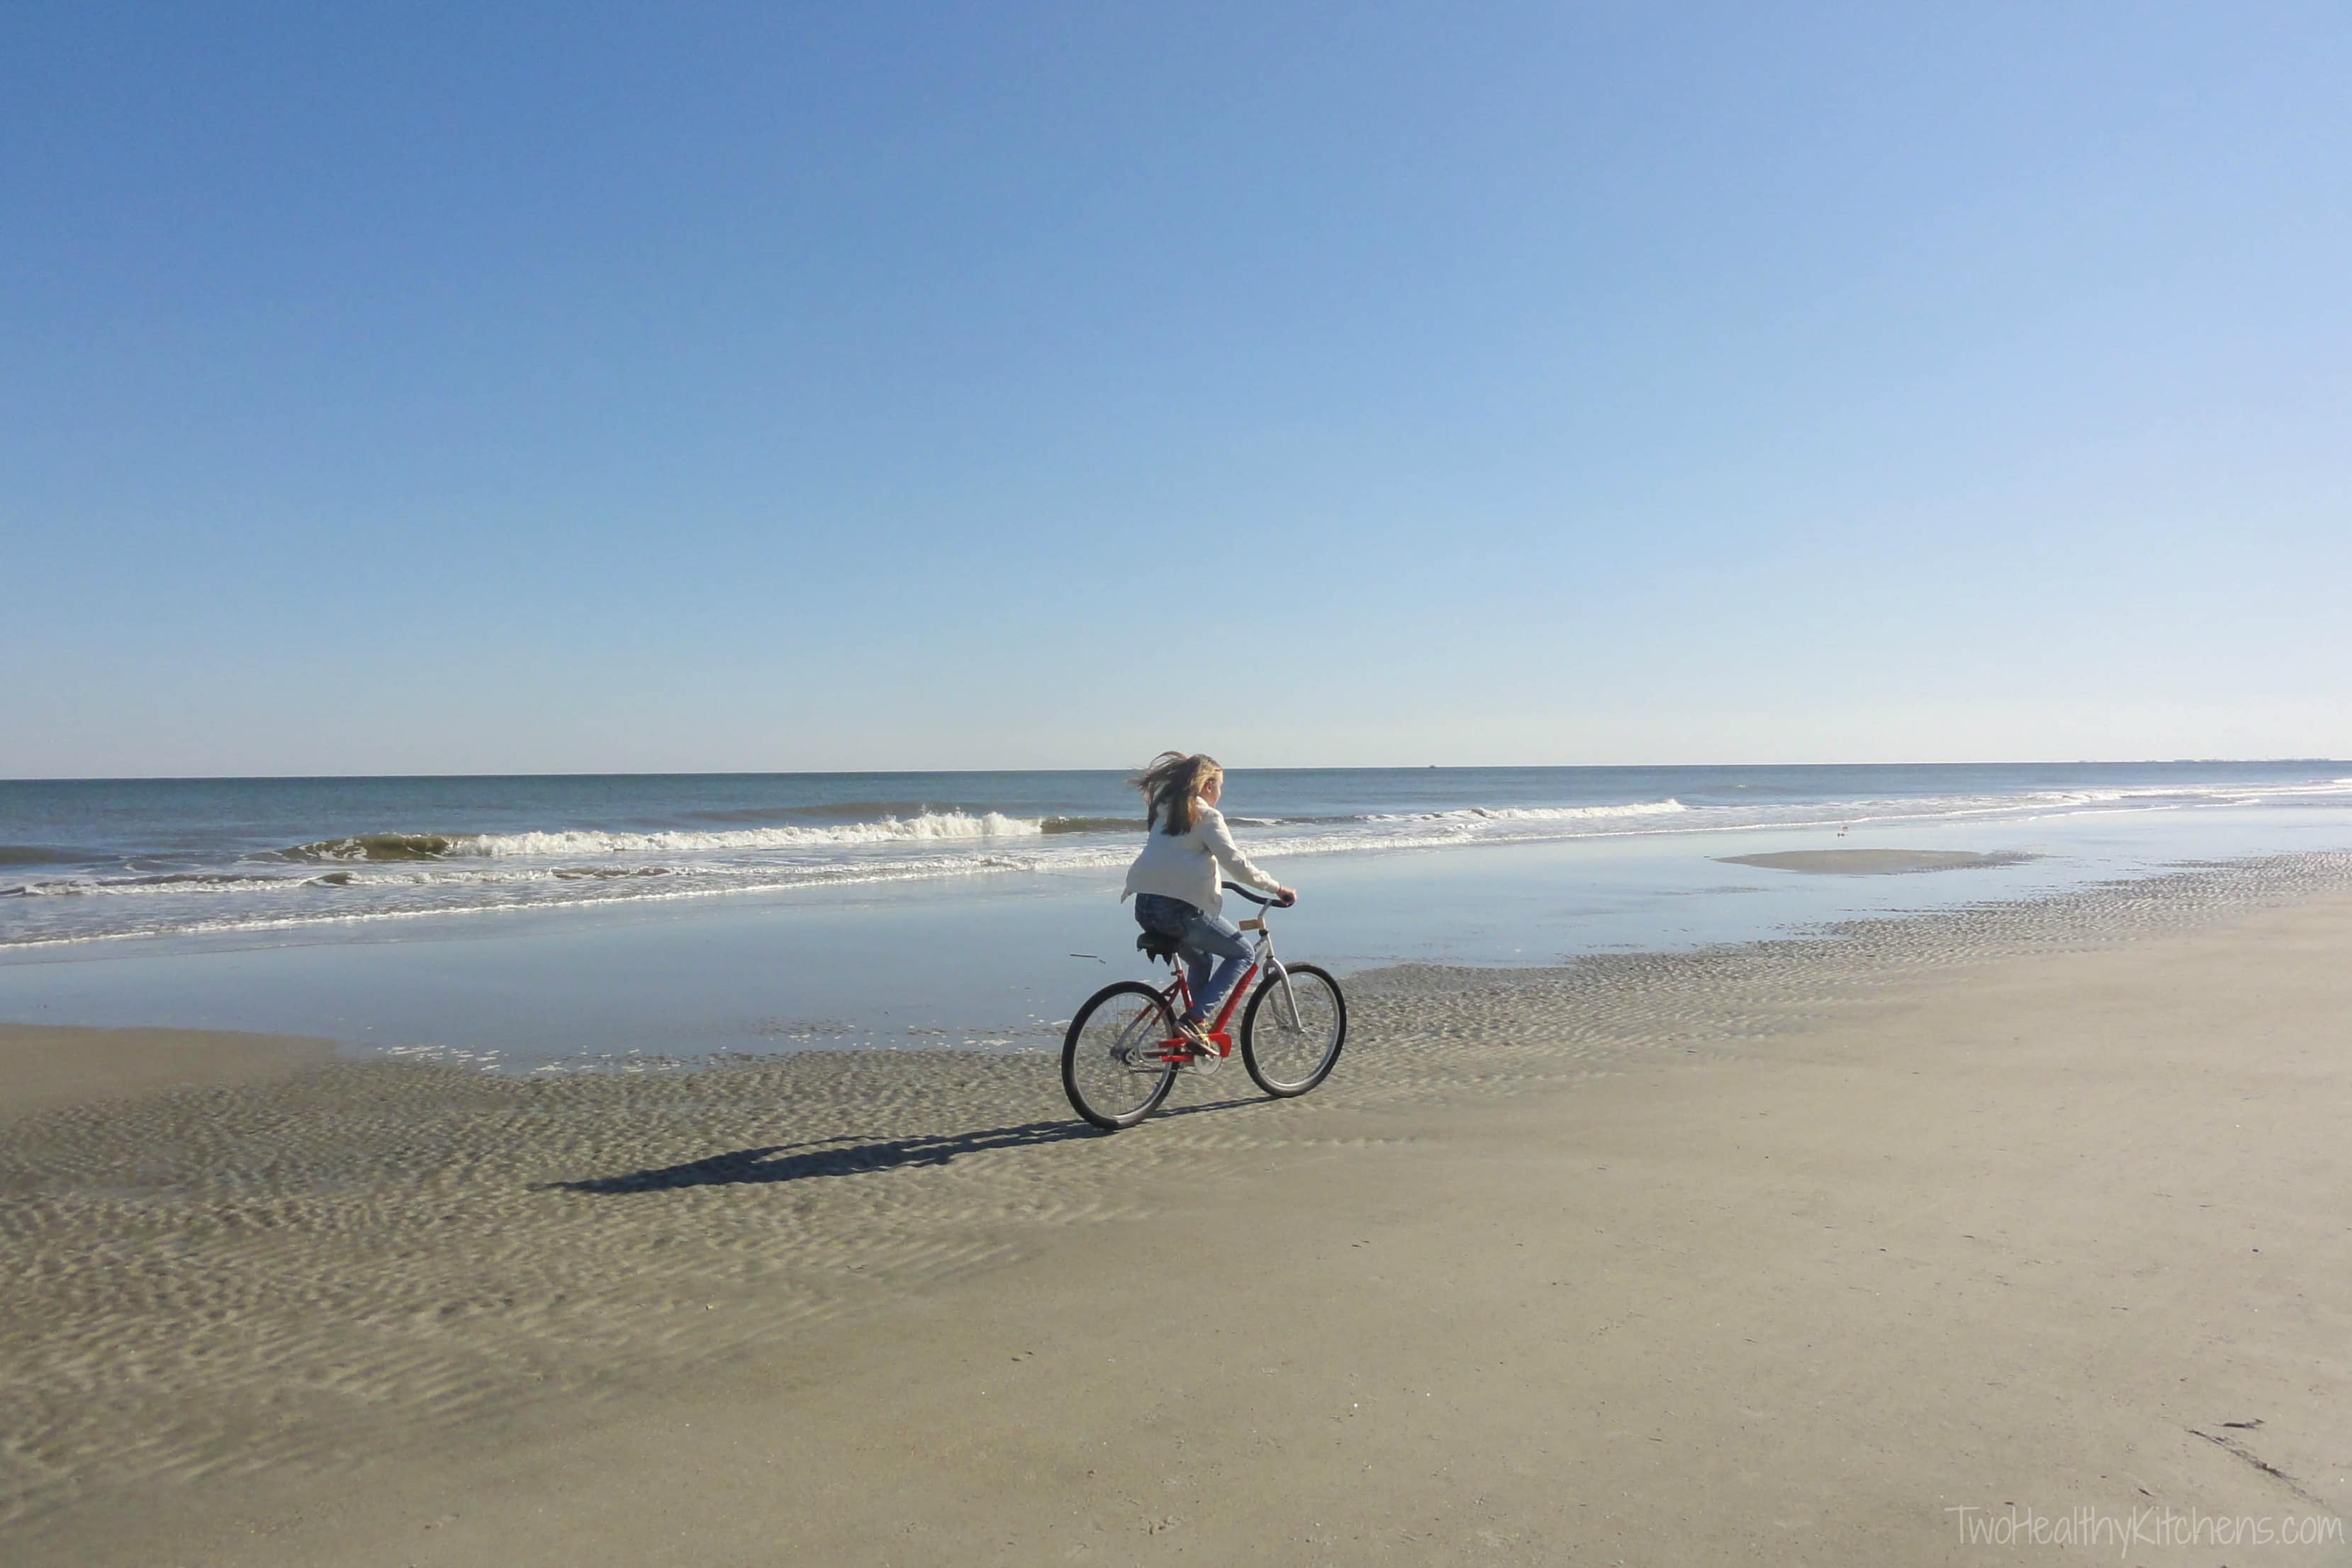 Girl in jeans and jacket riding red bike on beach at surf line.